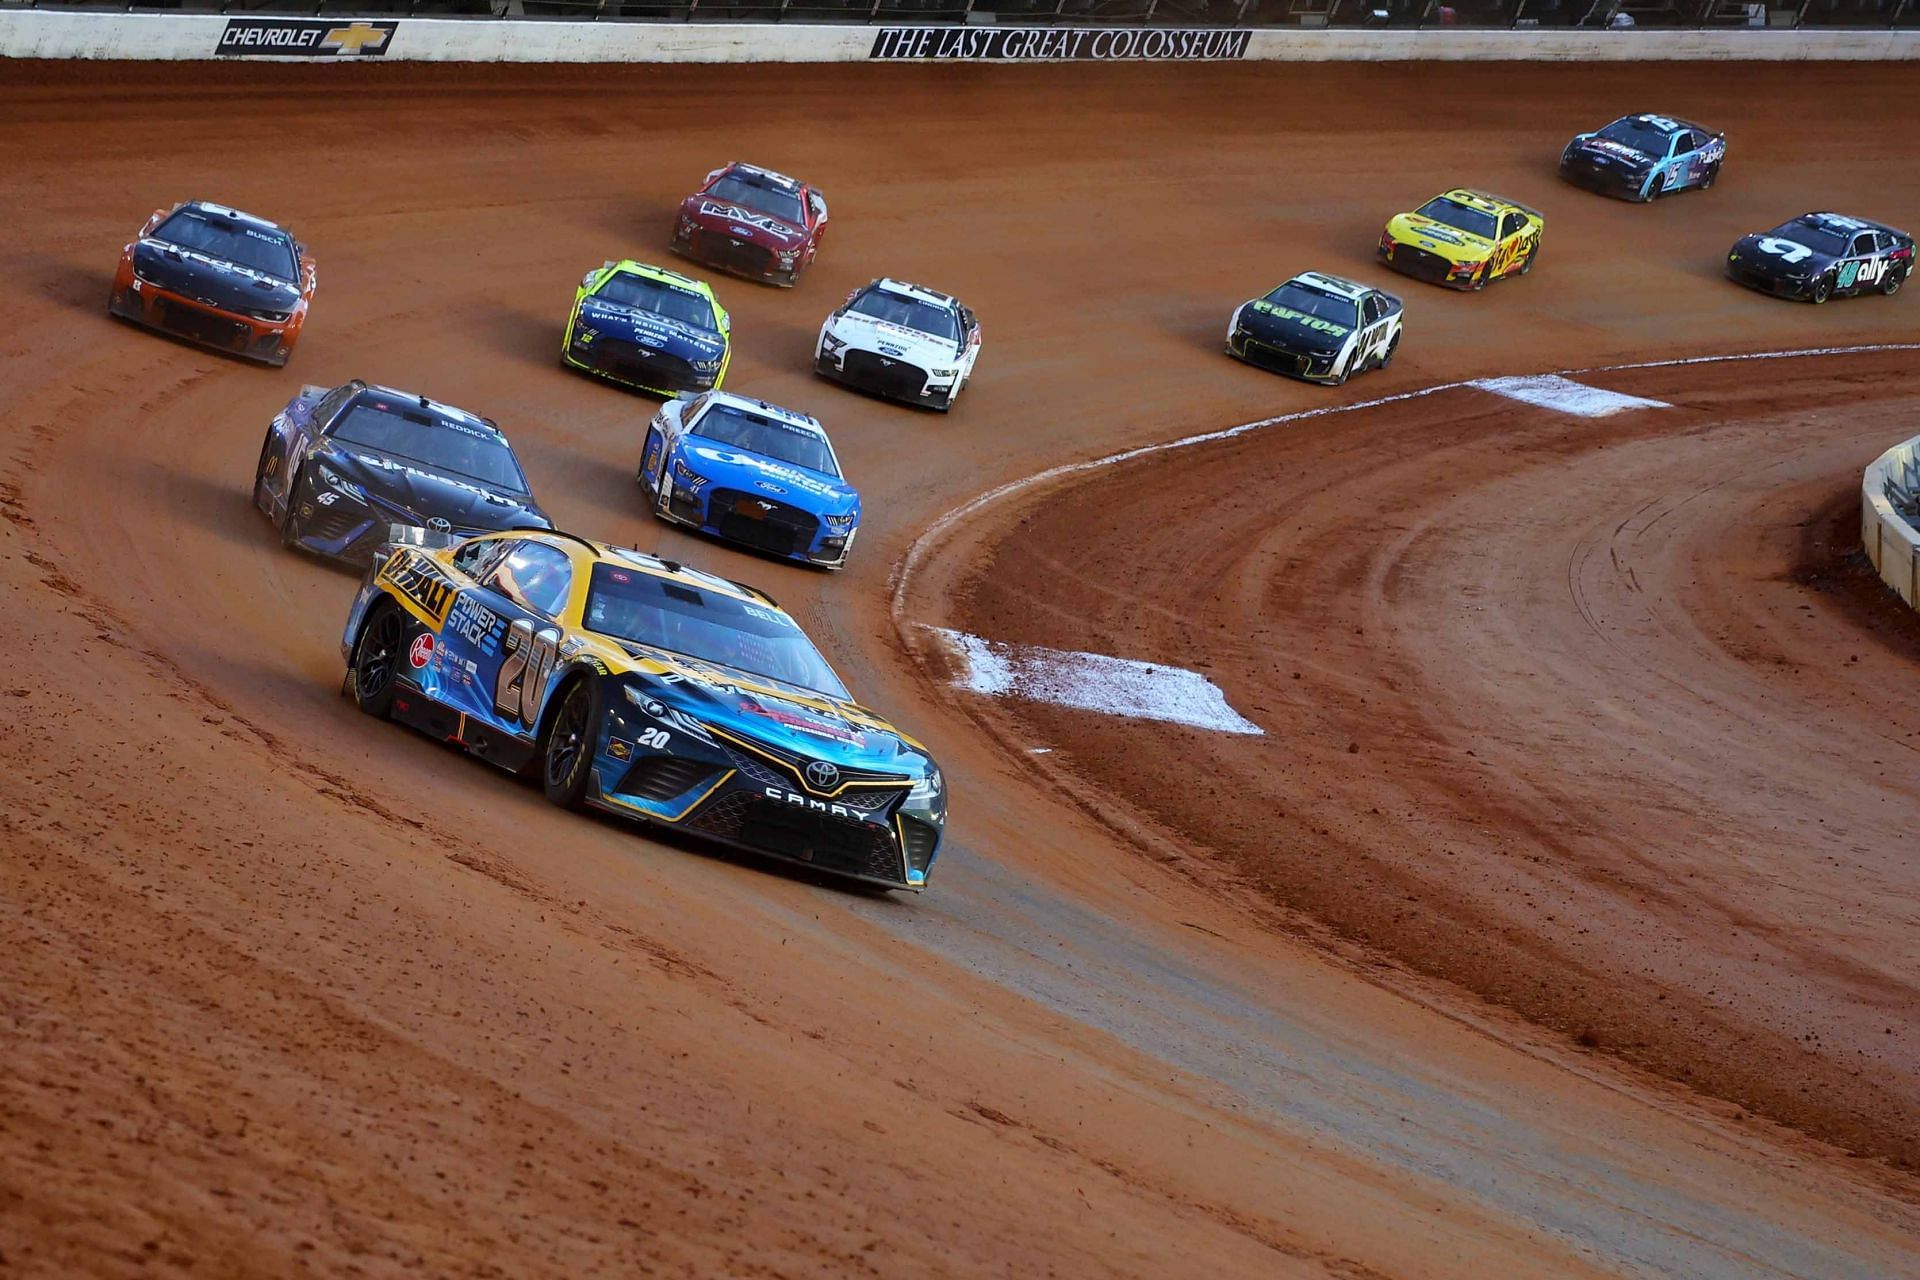 NASCAR has announced the discontinuation of the Bristol dirt races